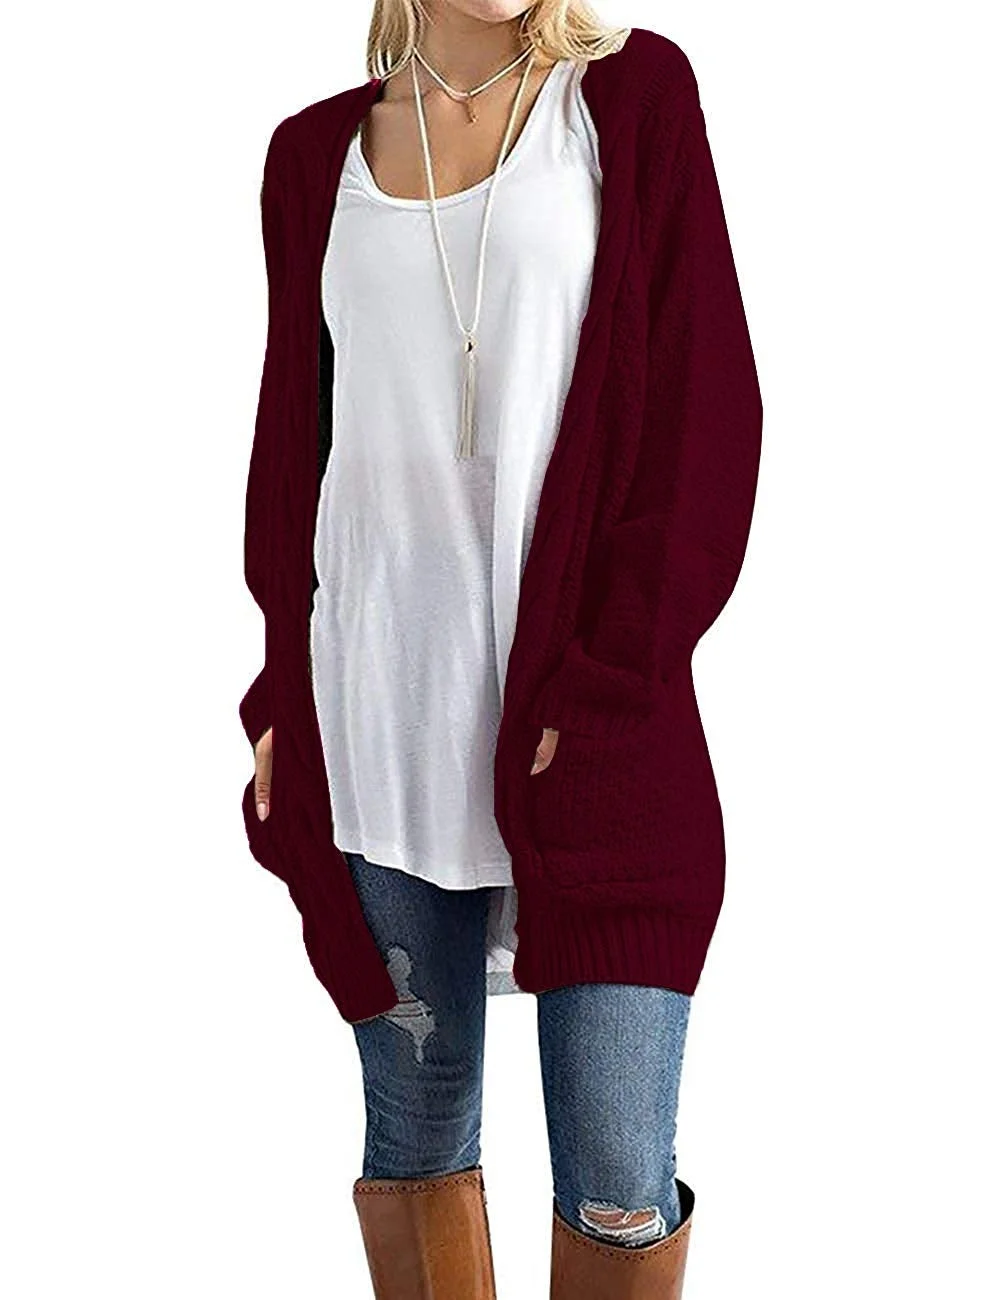 Women's Loose Open Front Long Sleeve Solid Color Knit Cardigans Sweater Blouses with Pockets